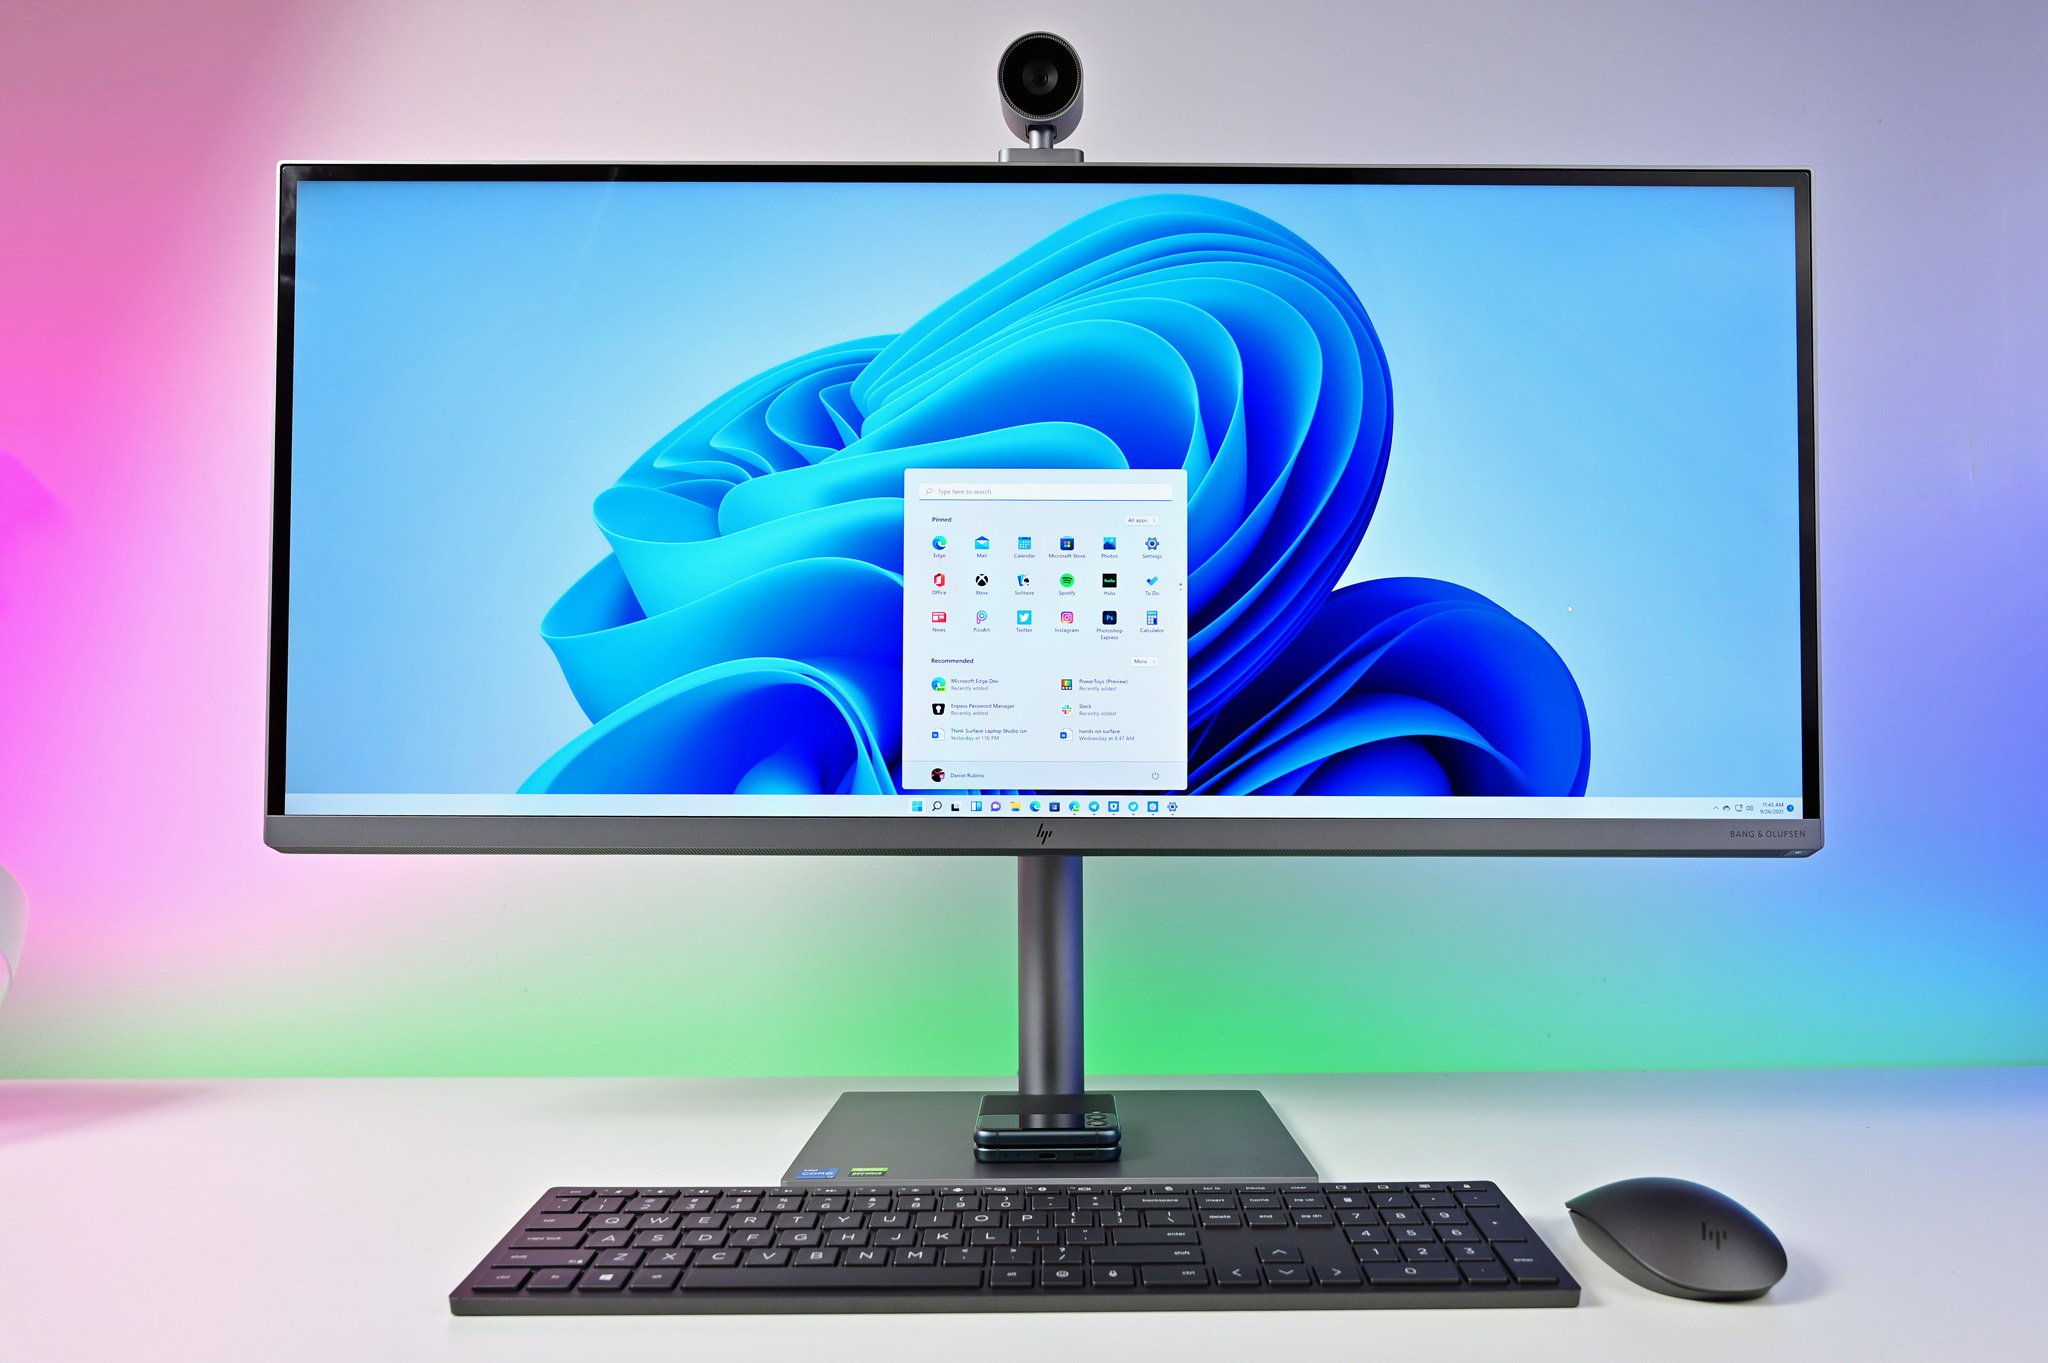 HP's ENVY 34 All-in-One Desktop PC is now available for preorder